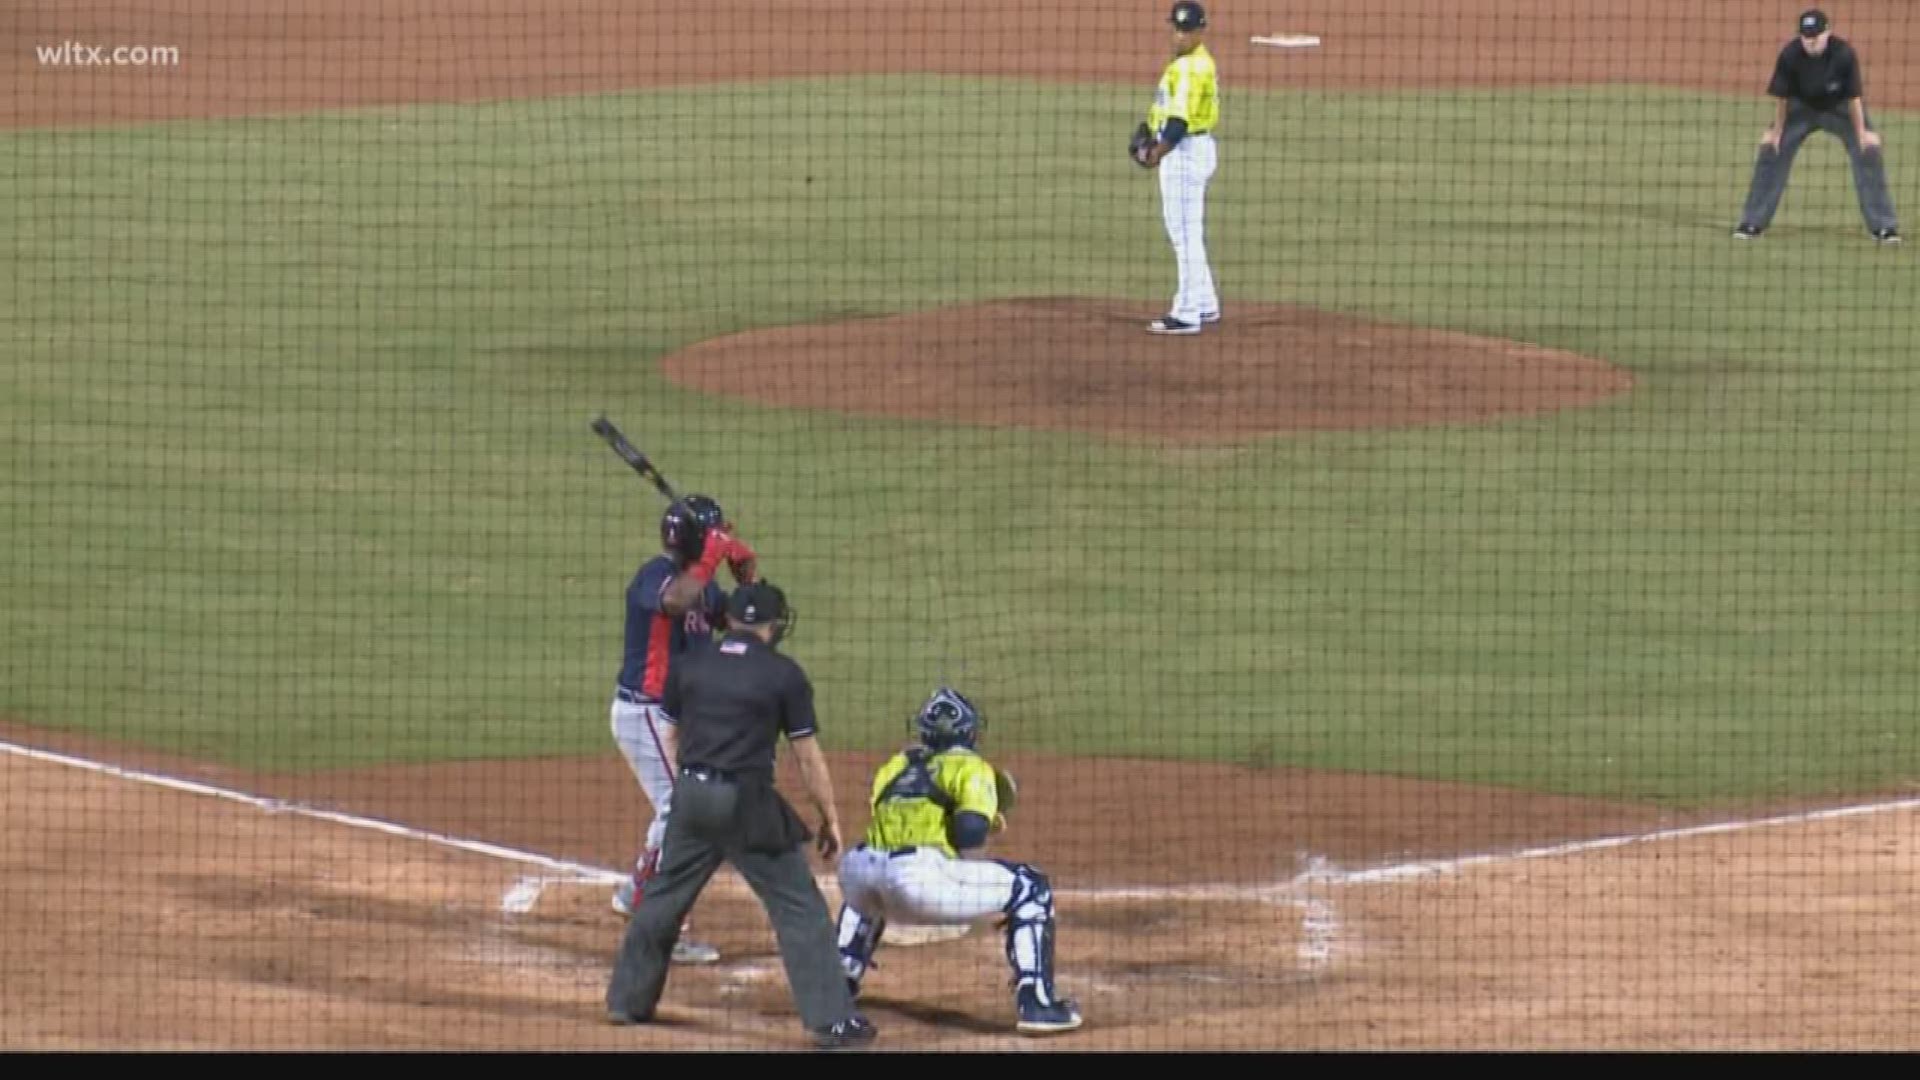 The Columbia Fireflies rallied from a 4-1 deficit to defeat Rome 7-4.